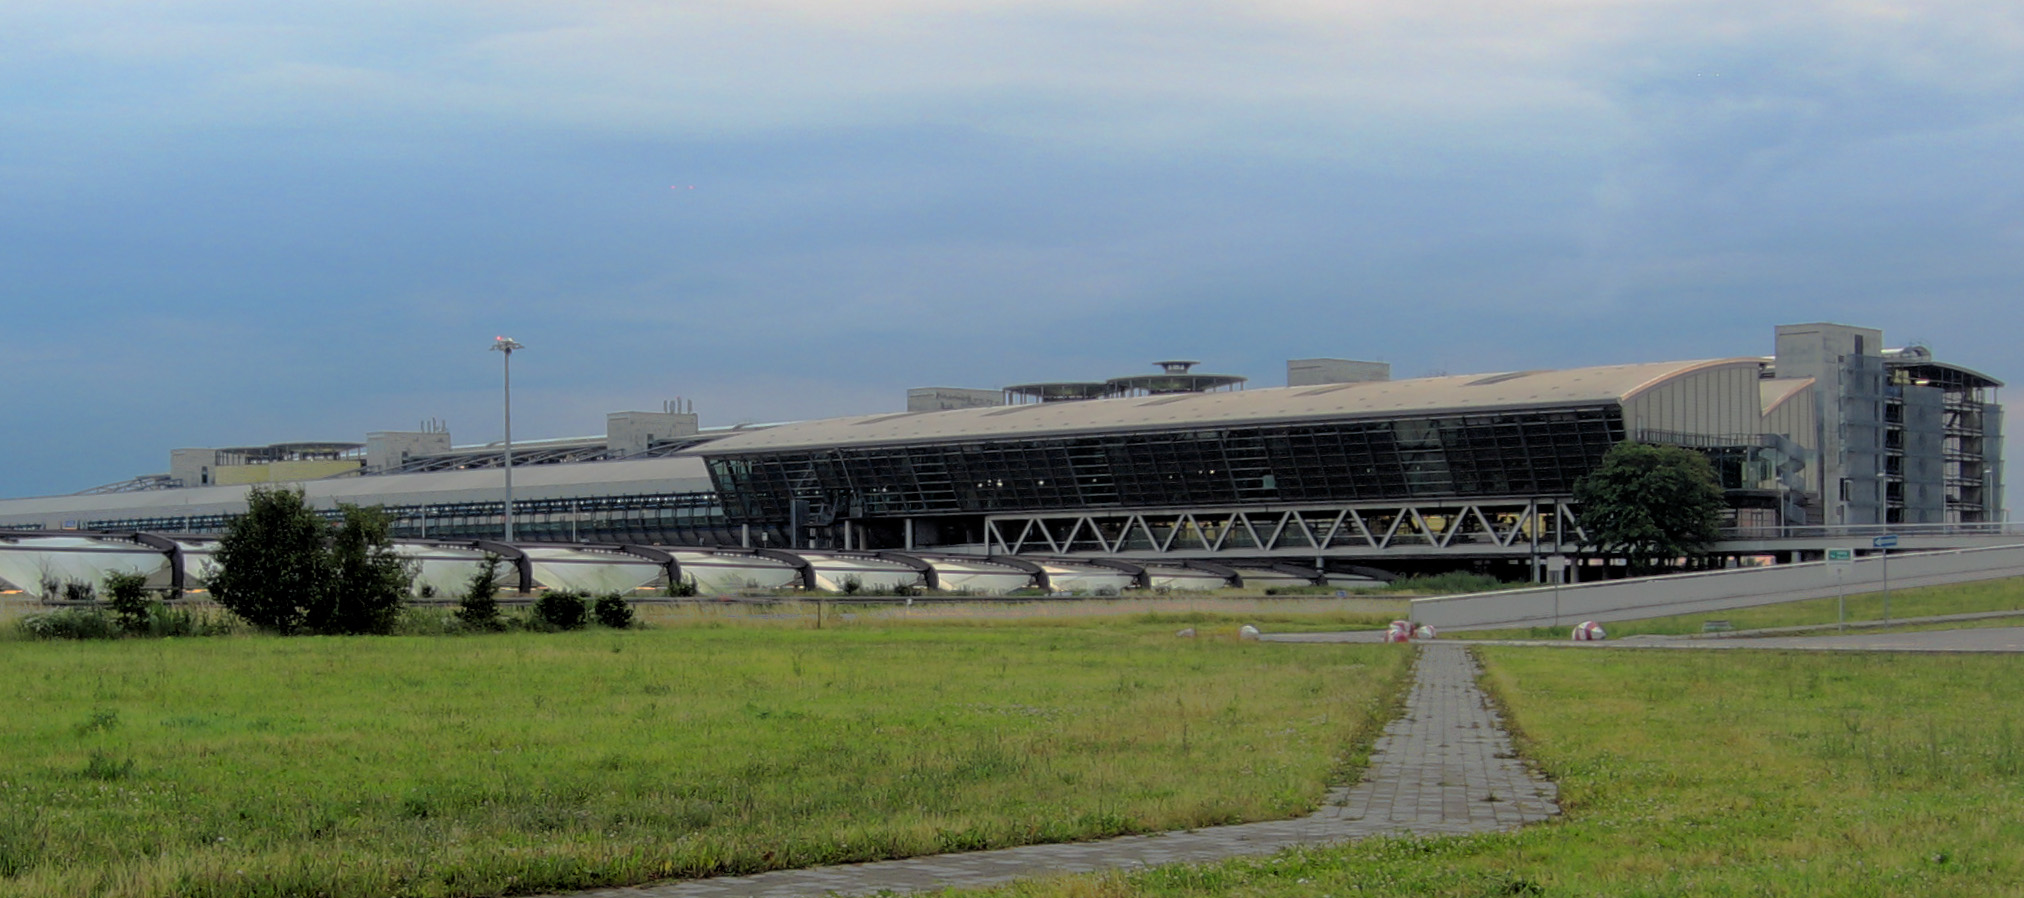 Leipzig/Halle Airport serves both Leipzig and Halle cities.